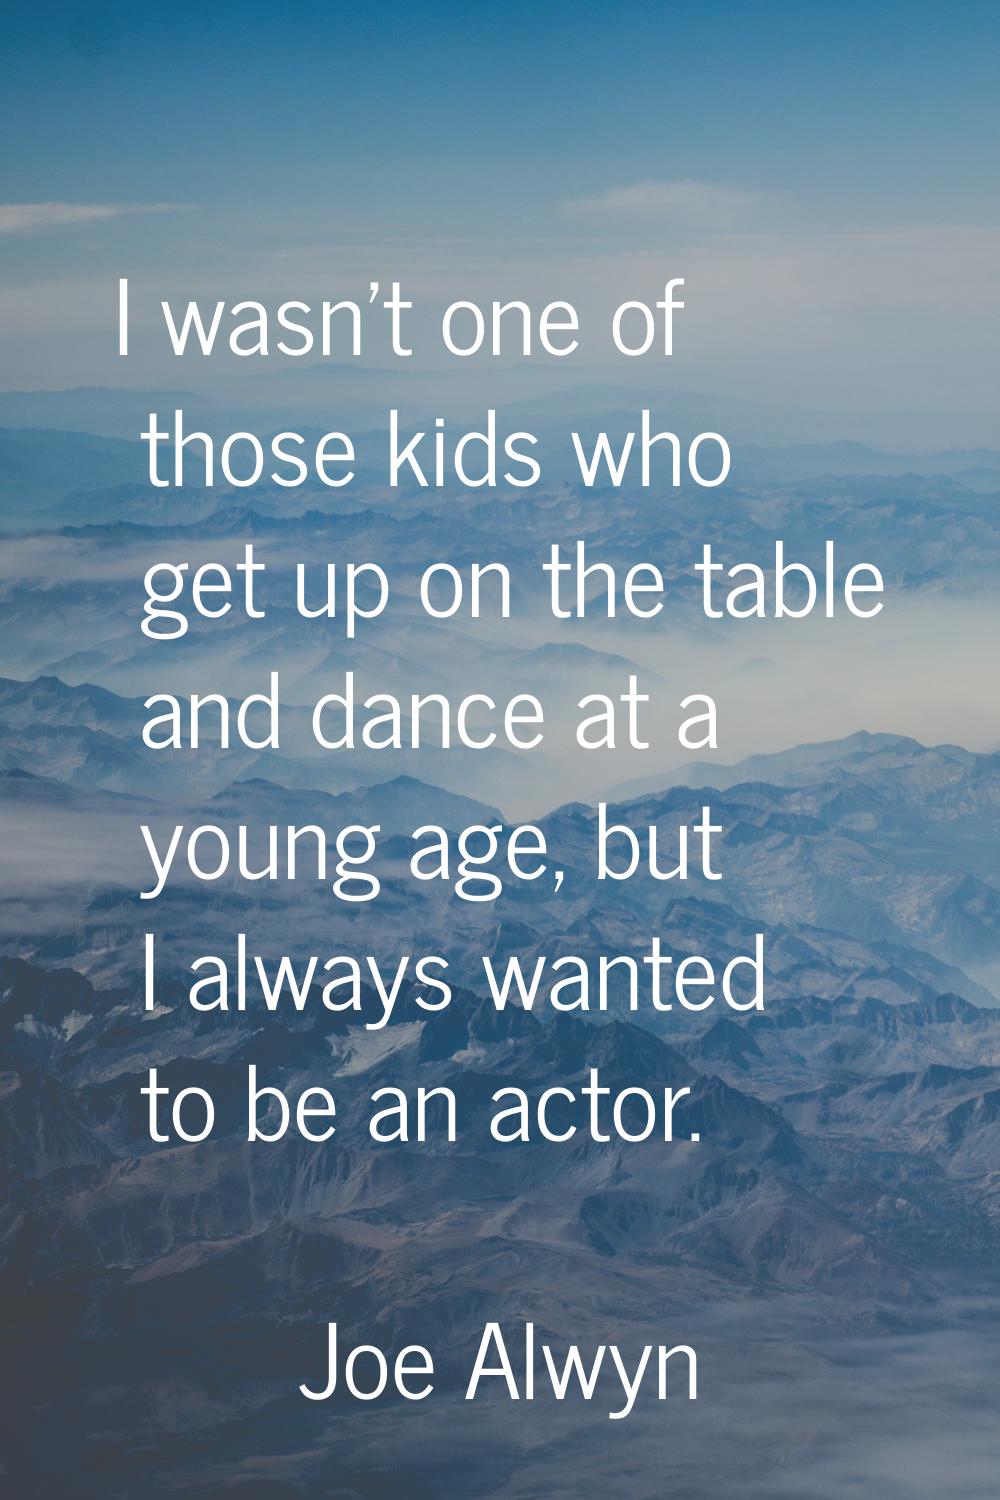 I wasn't one of those kids who get up on the table and dance at a young age, but I always wanted to